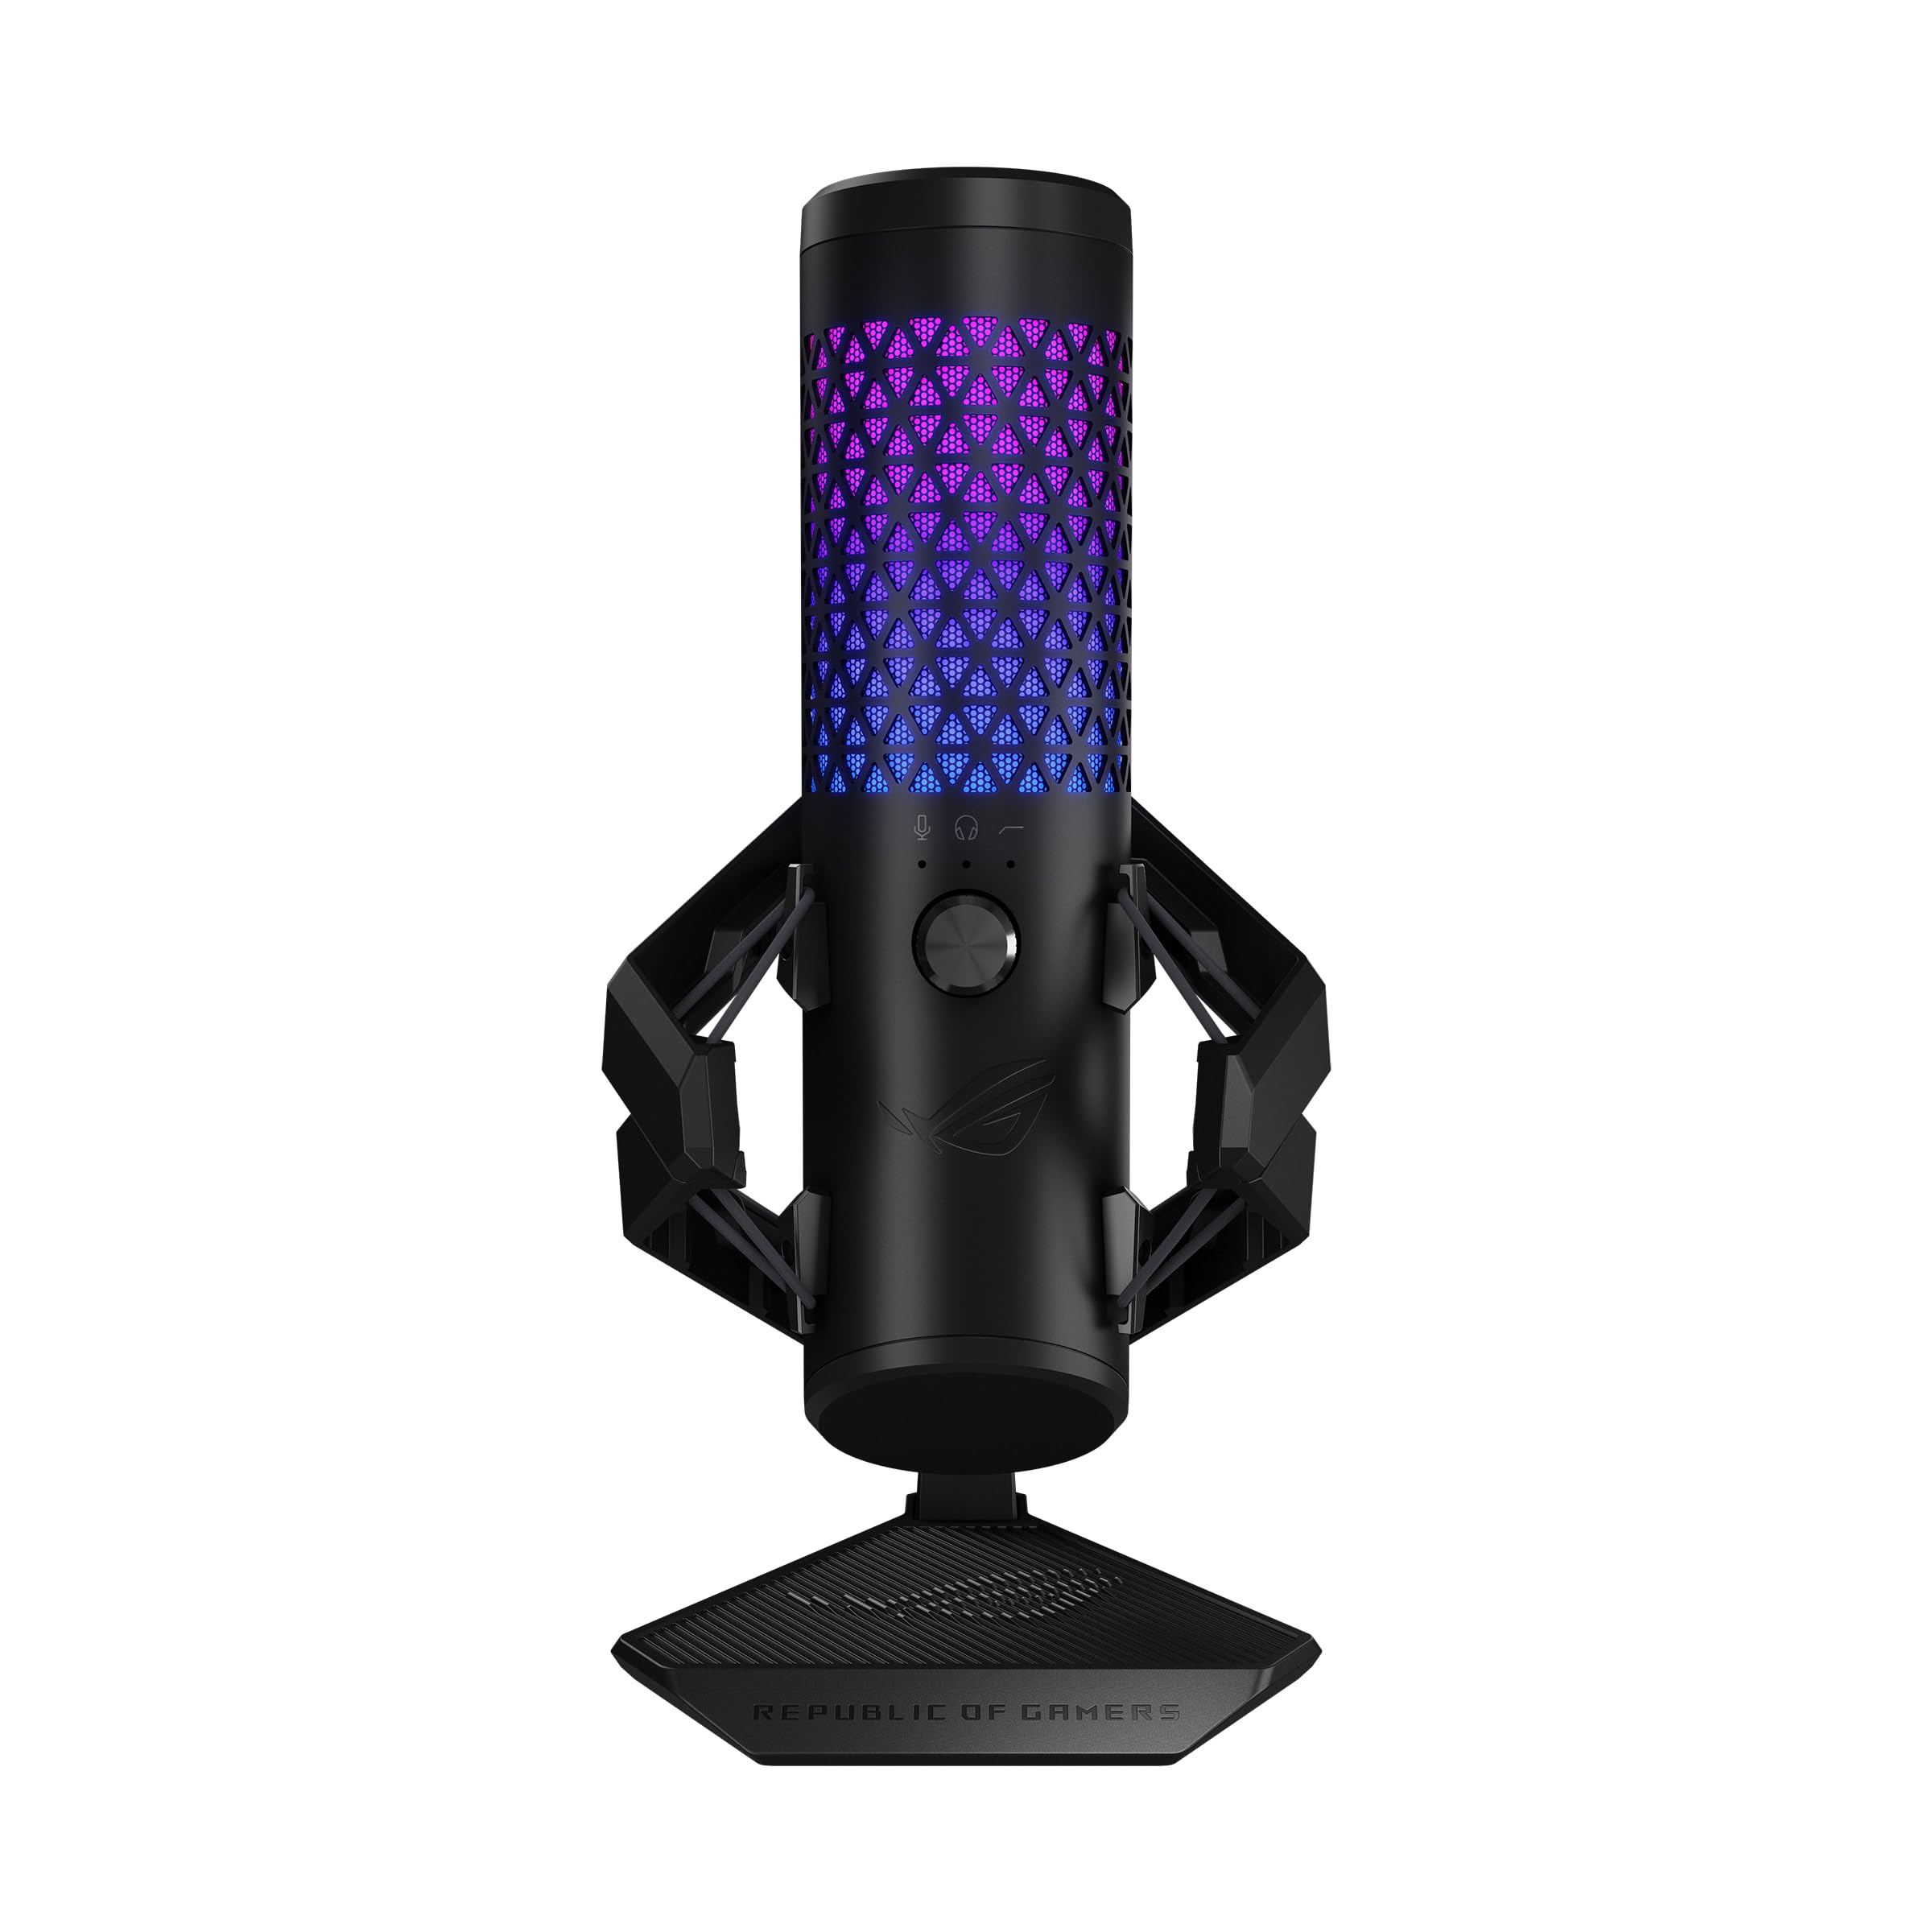 ASUS ROG Carnyx USB Gaming Microphone (25mm Condenser Capsule, 192kHz/24-bit, Cardioid, high-Pass Filter, Built-in pop Filter, Metal Shock Mount, one-Touch Mute, USB, Aura Sync RGB)- Black